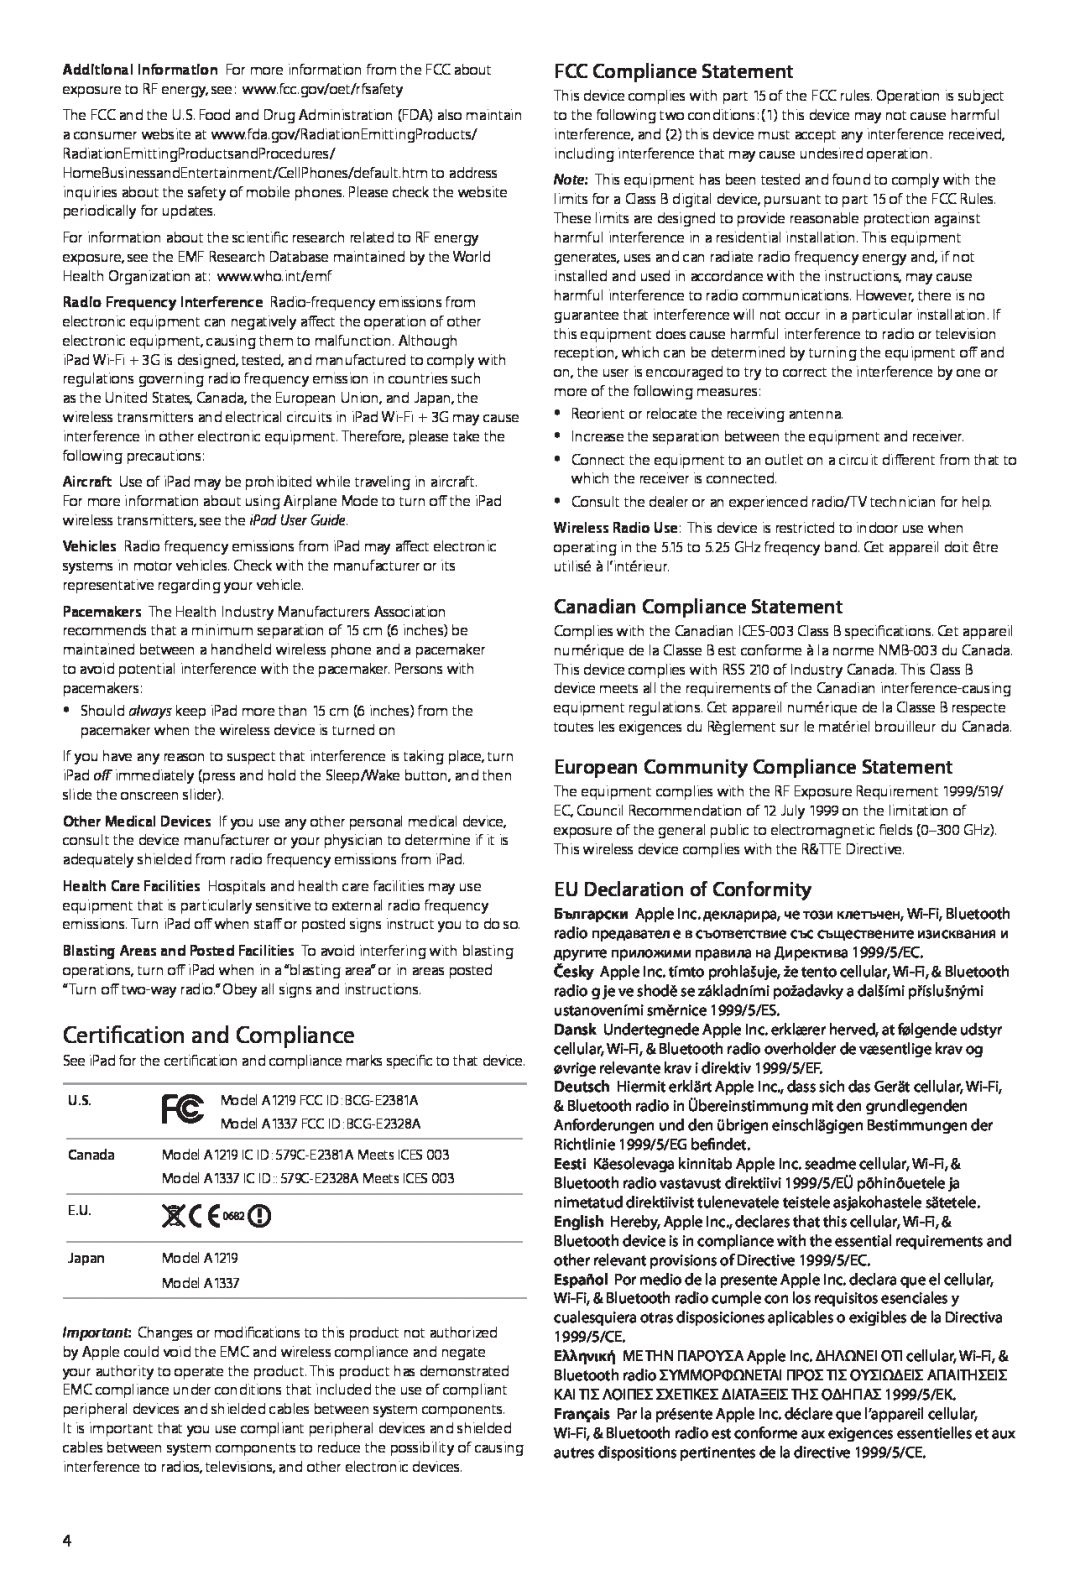 Apple A1219, 034-5320-A manual Certification and Compliance, FCC Compliance Statement, Canadian Compliance Statement 